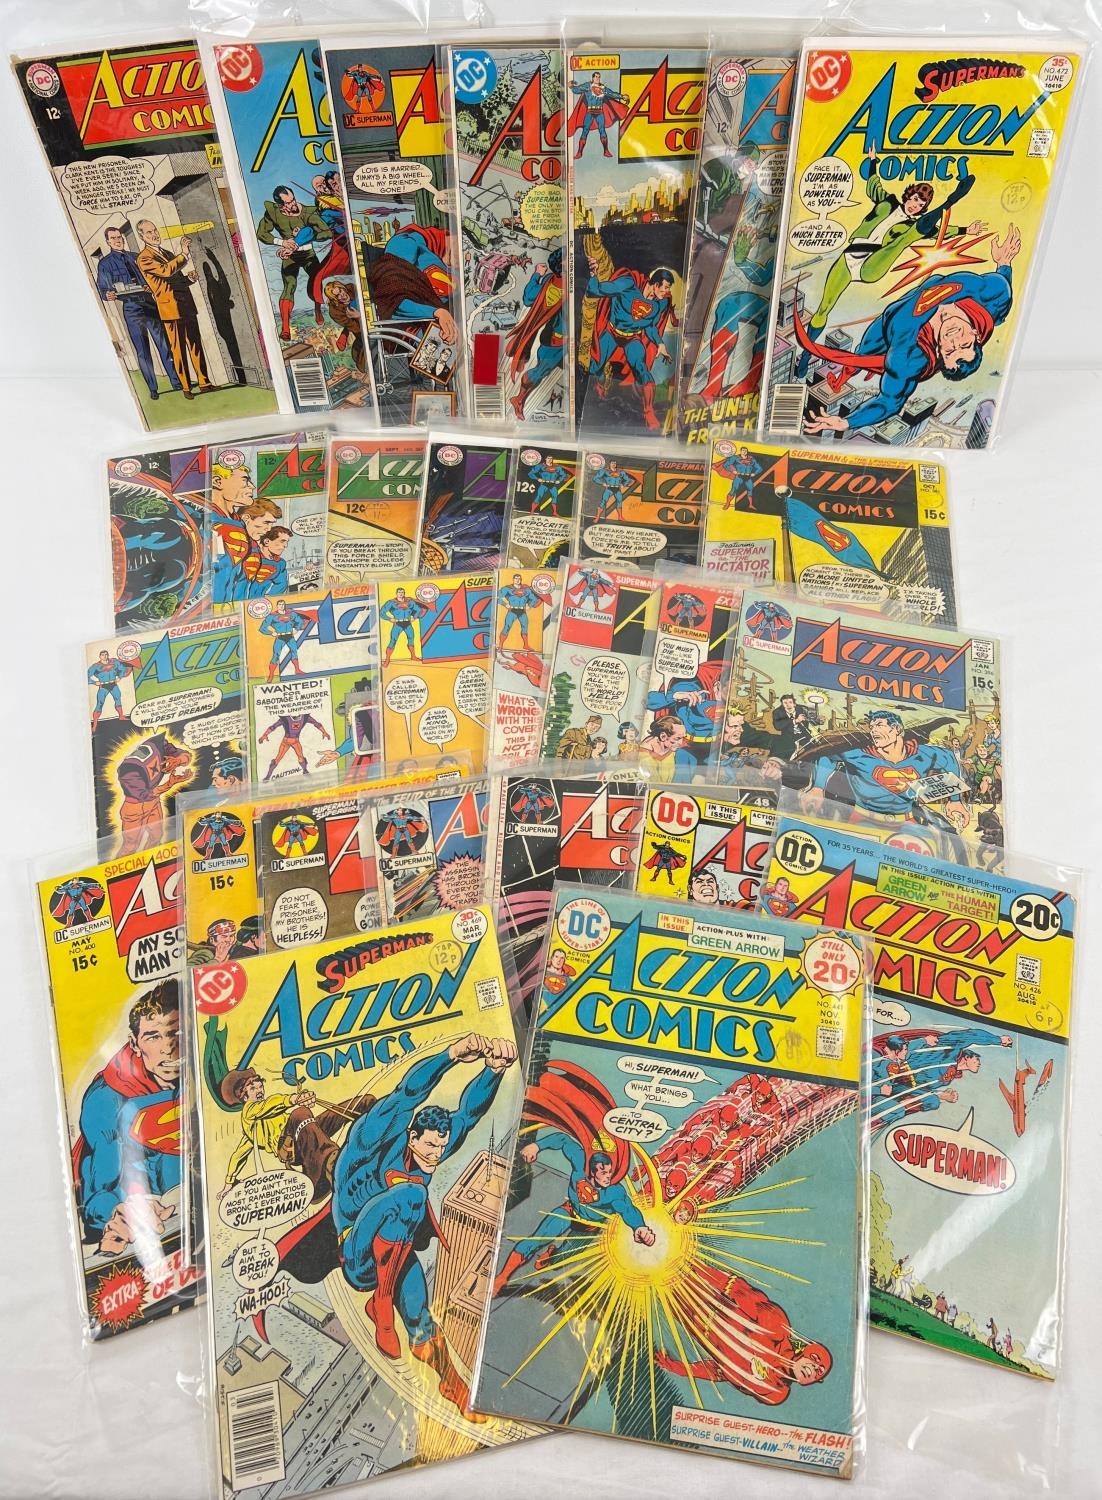 31 vintage issues of Action Comics comic books by DC Comics. Issues dating from 1965-1977.